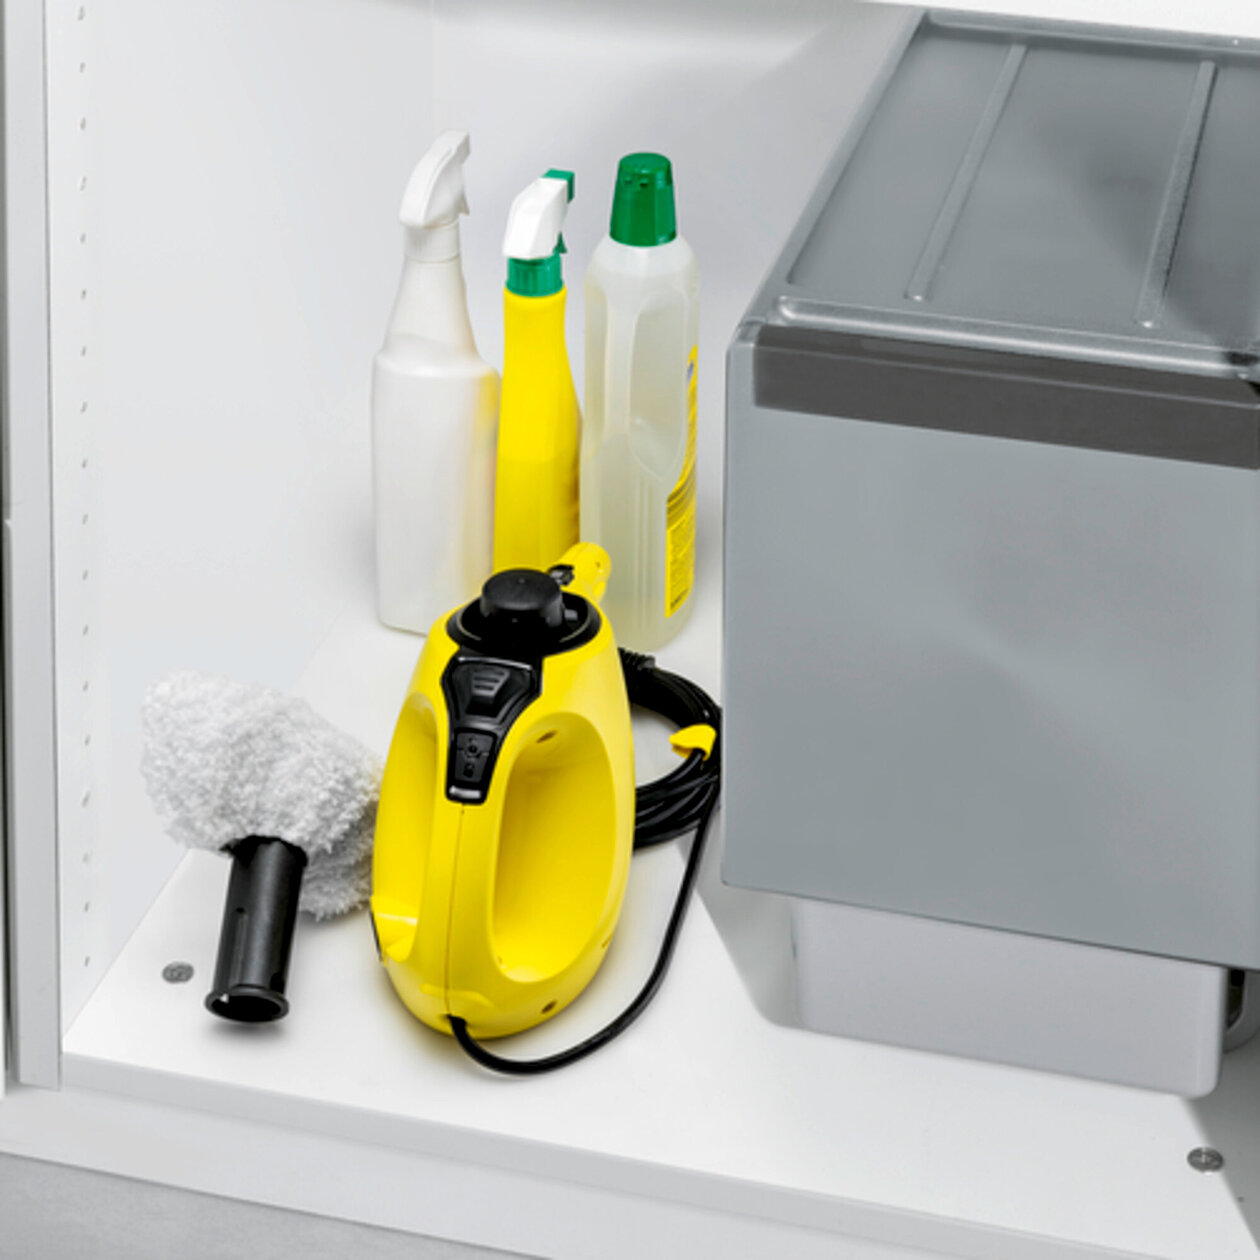 Steam cleaner SC 1 EasyFix: Small, handy and easy to store